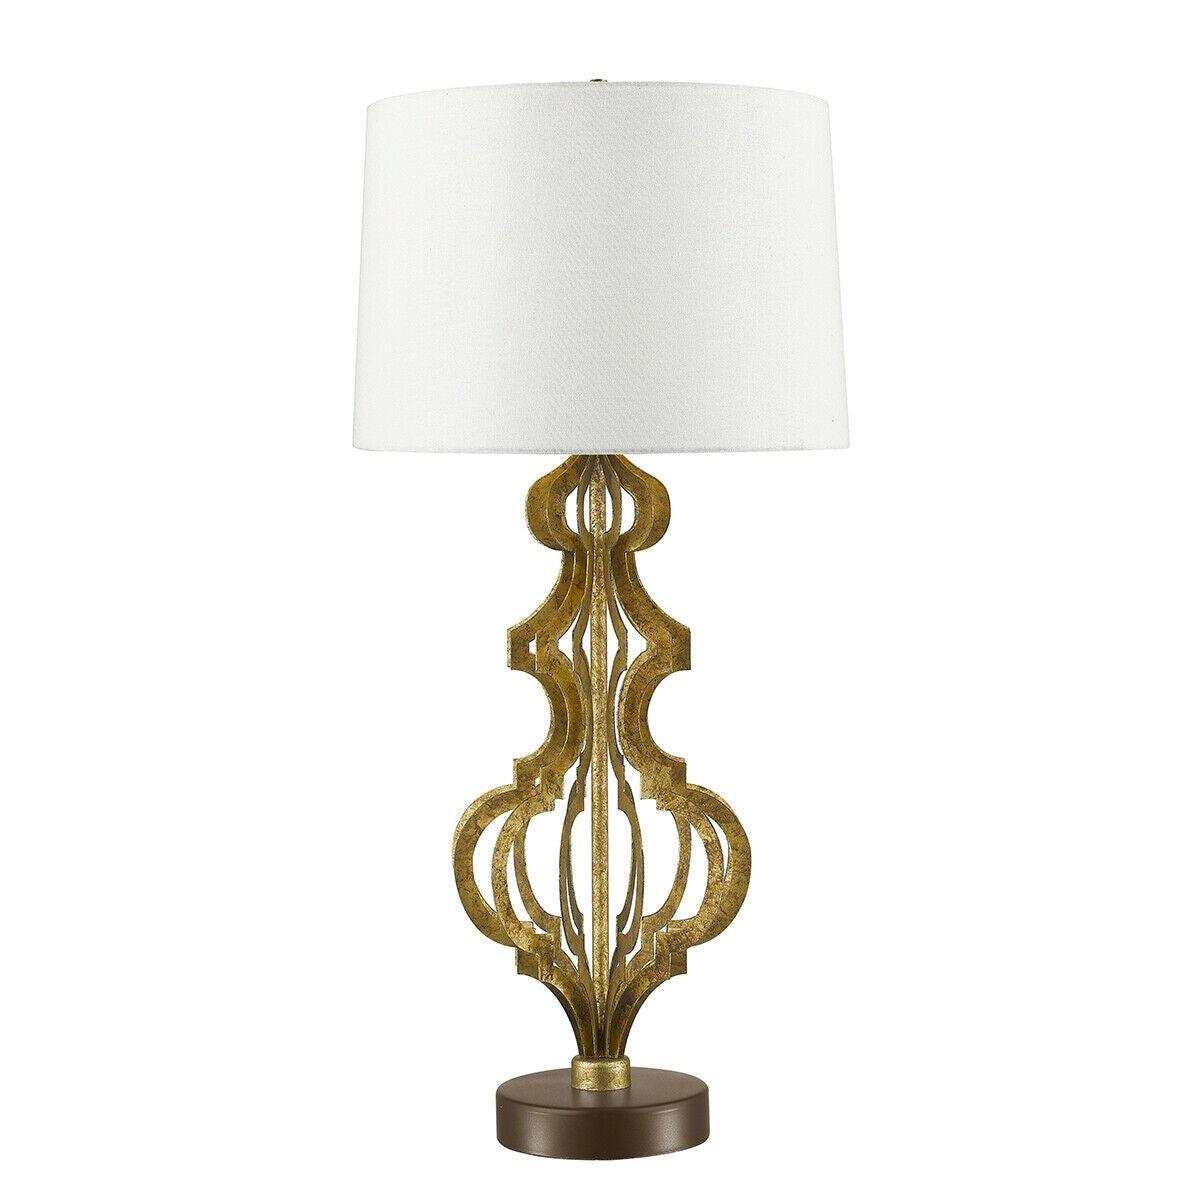 Table Lamp Open Design Scroll Effect Cream Shade Distressed Gold LED E27 100W